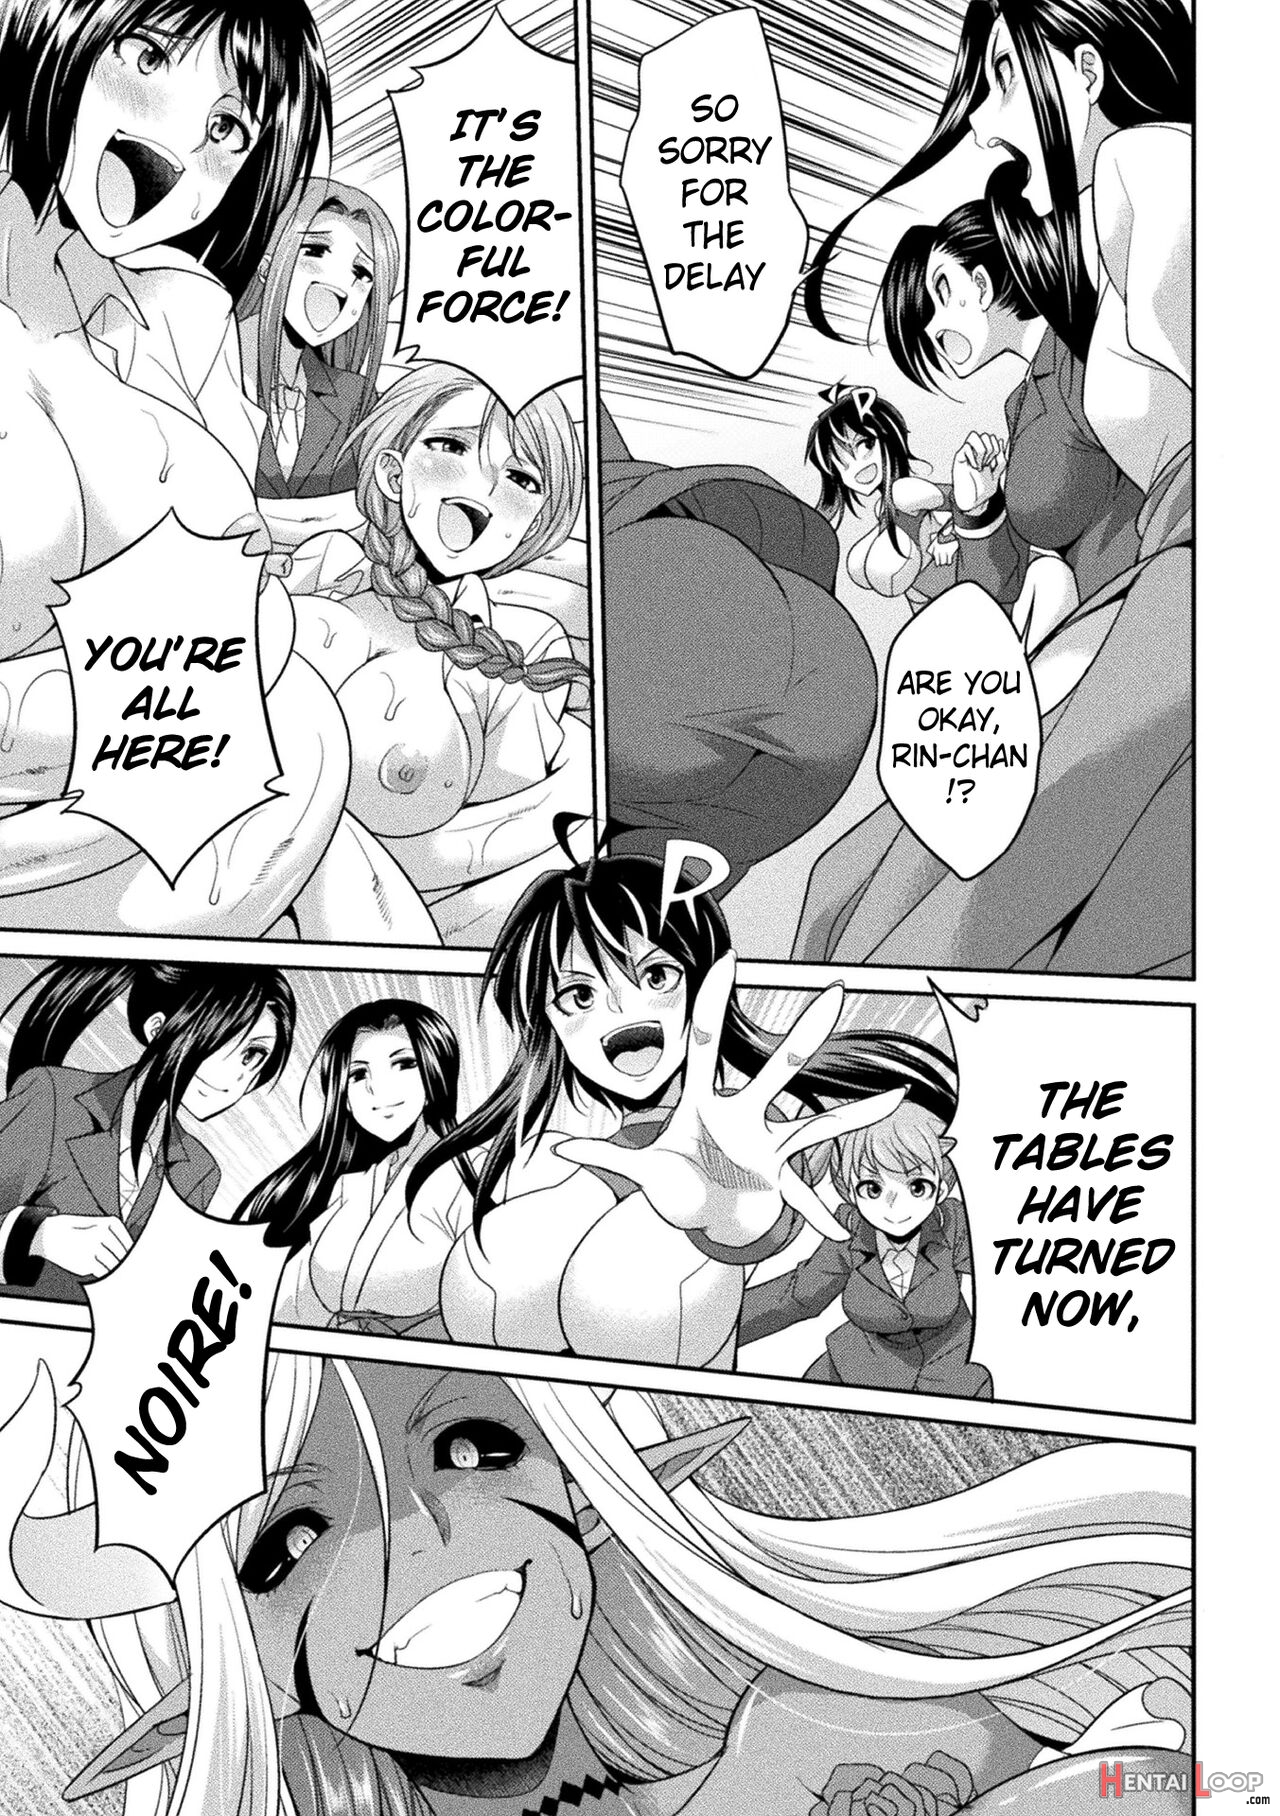 Special Duty Squadron Colorful Force Heroines Of Justice Vs The Tentacle Queen! The Great Battle Of Futa Training!? page 138